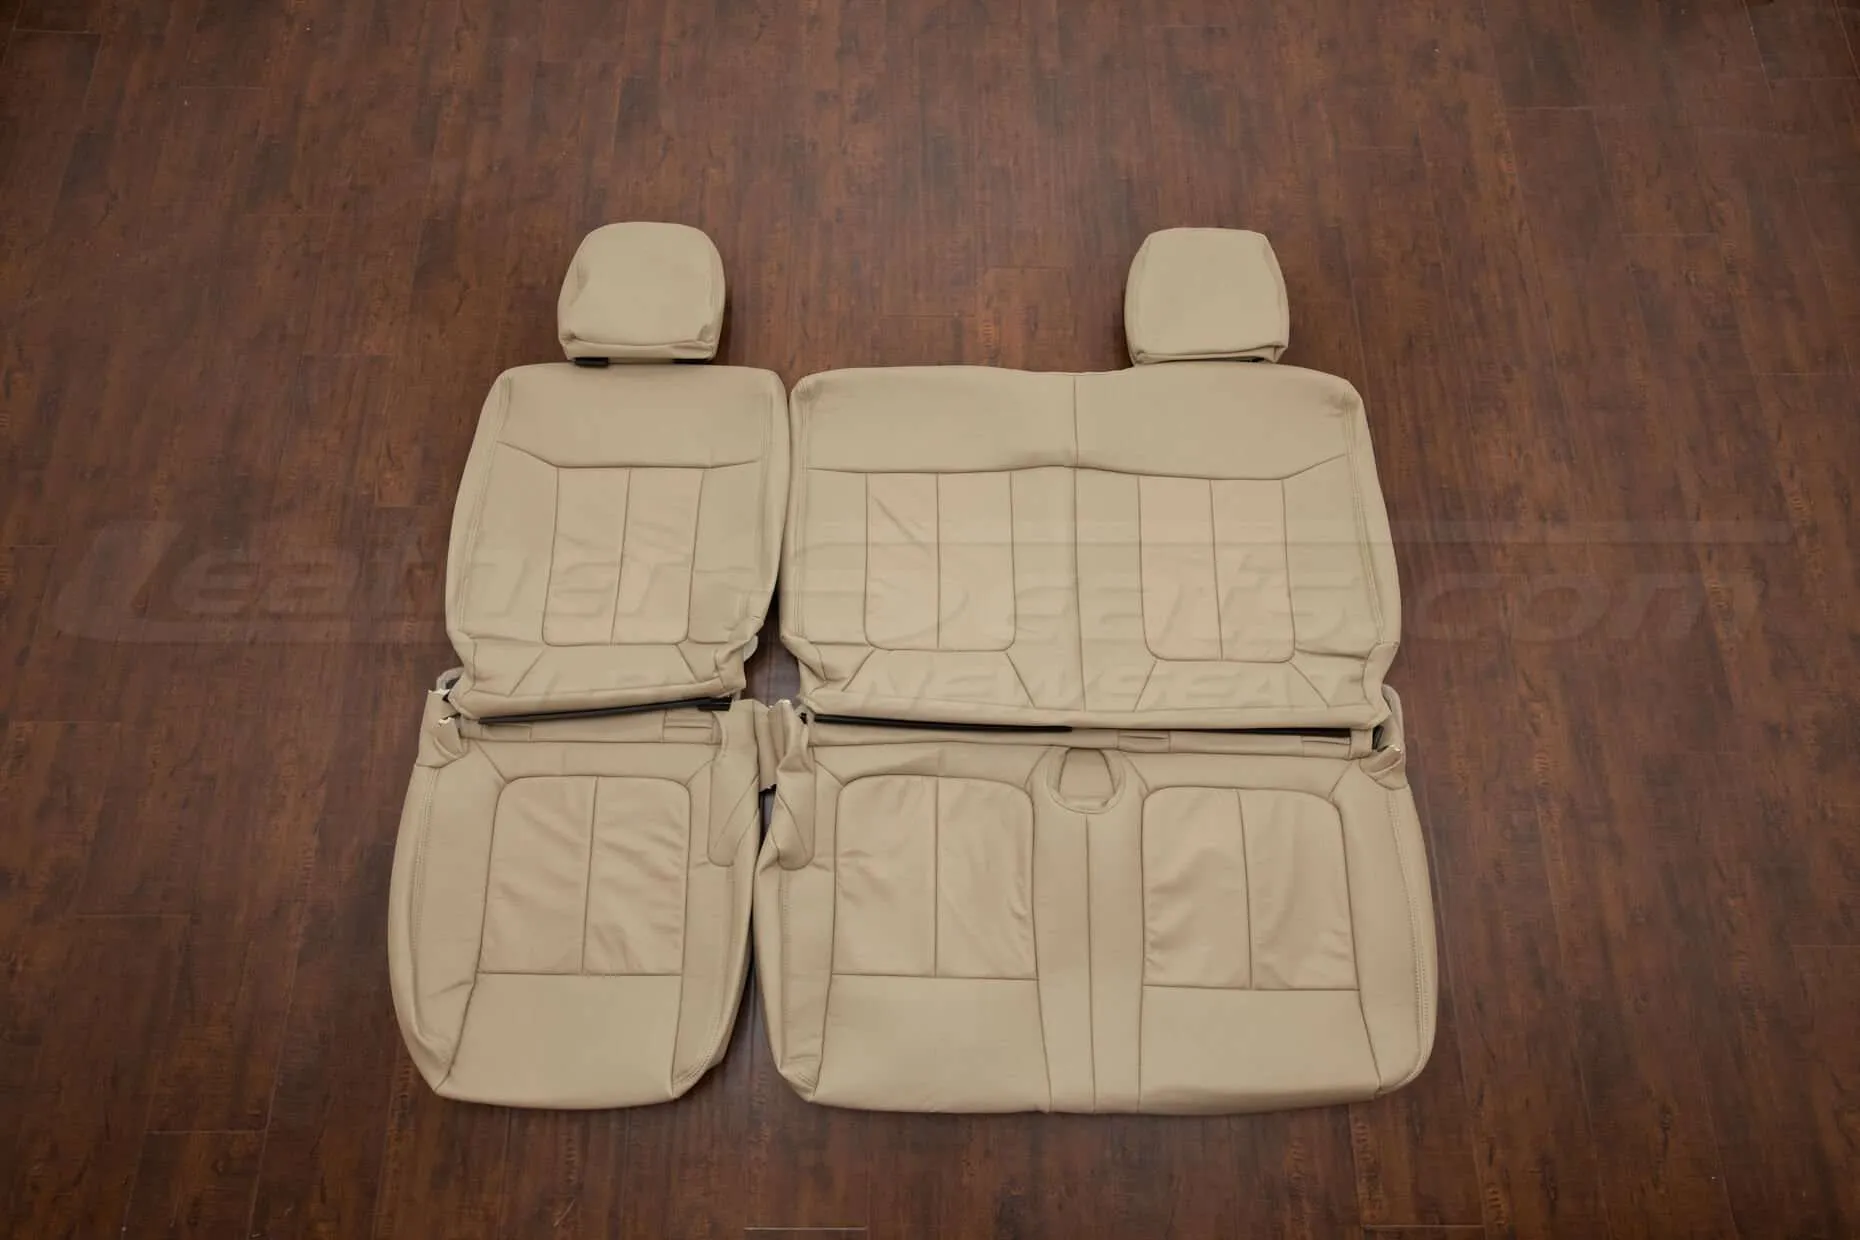 Ford F-150 Leather Upholstery Kit - Sandstone - Rear seats